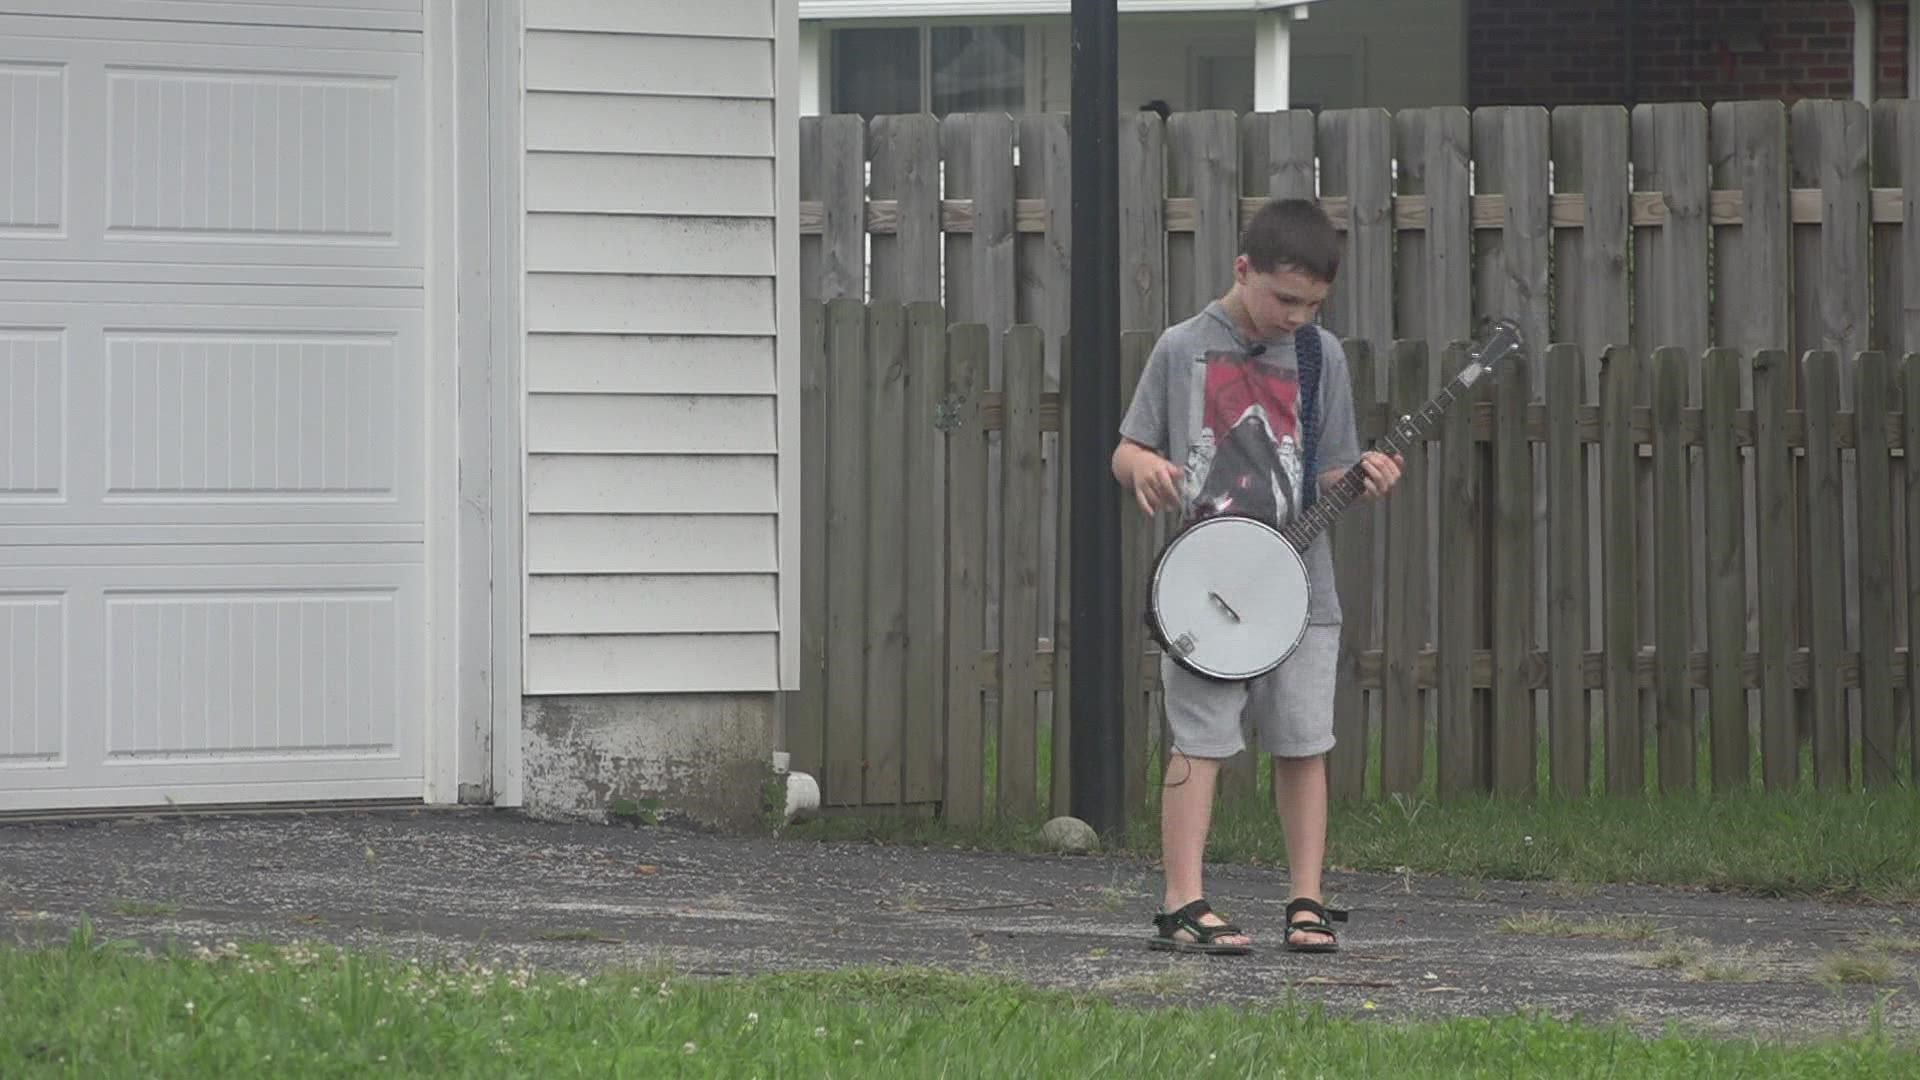 8-year-old Sam Gillespie raised more than $300 for Shriner's Hospital by playing his banjo in the backyard.